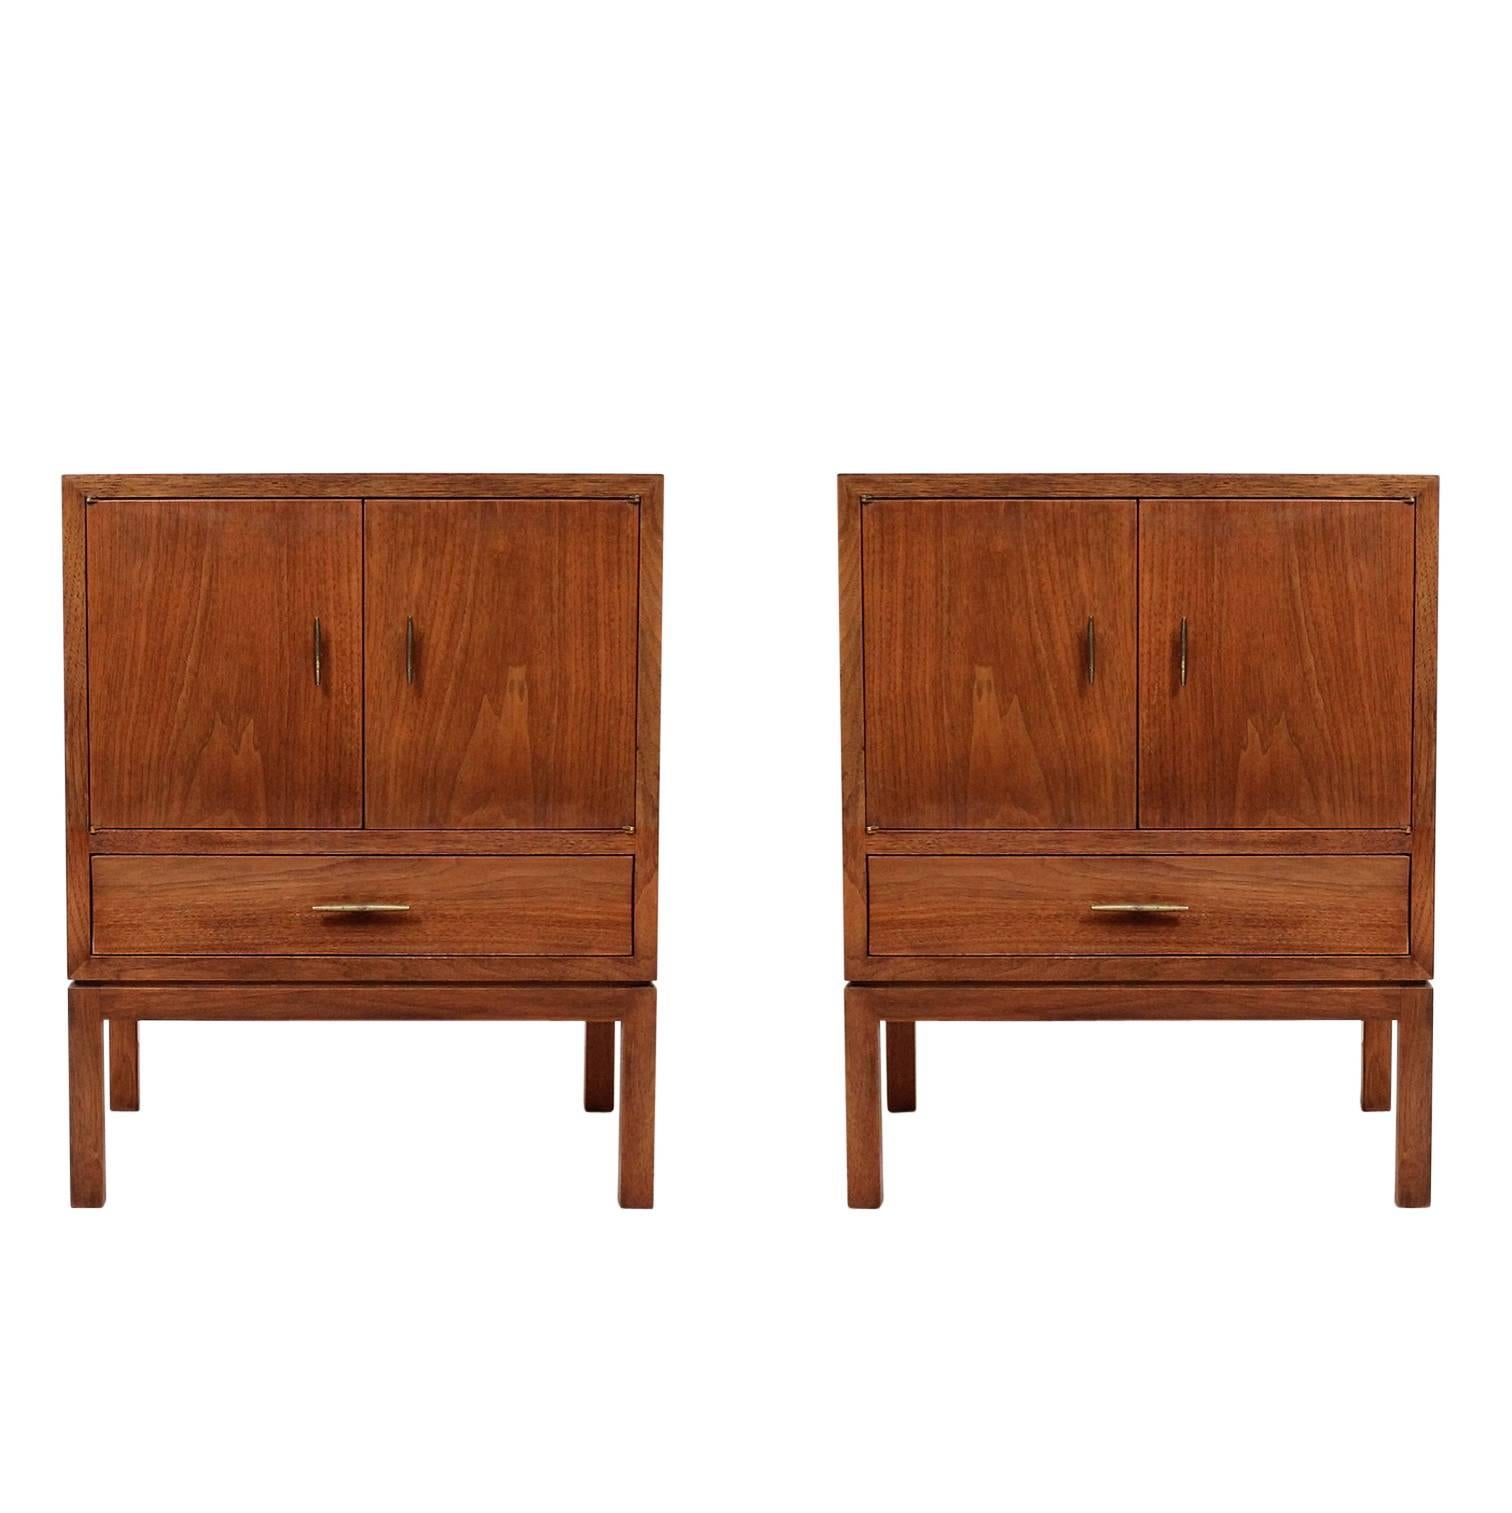 Pair of Nightstands by Edward Wormley for Dunbar